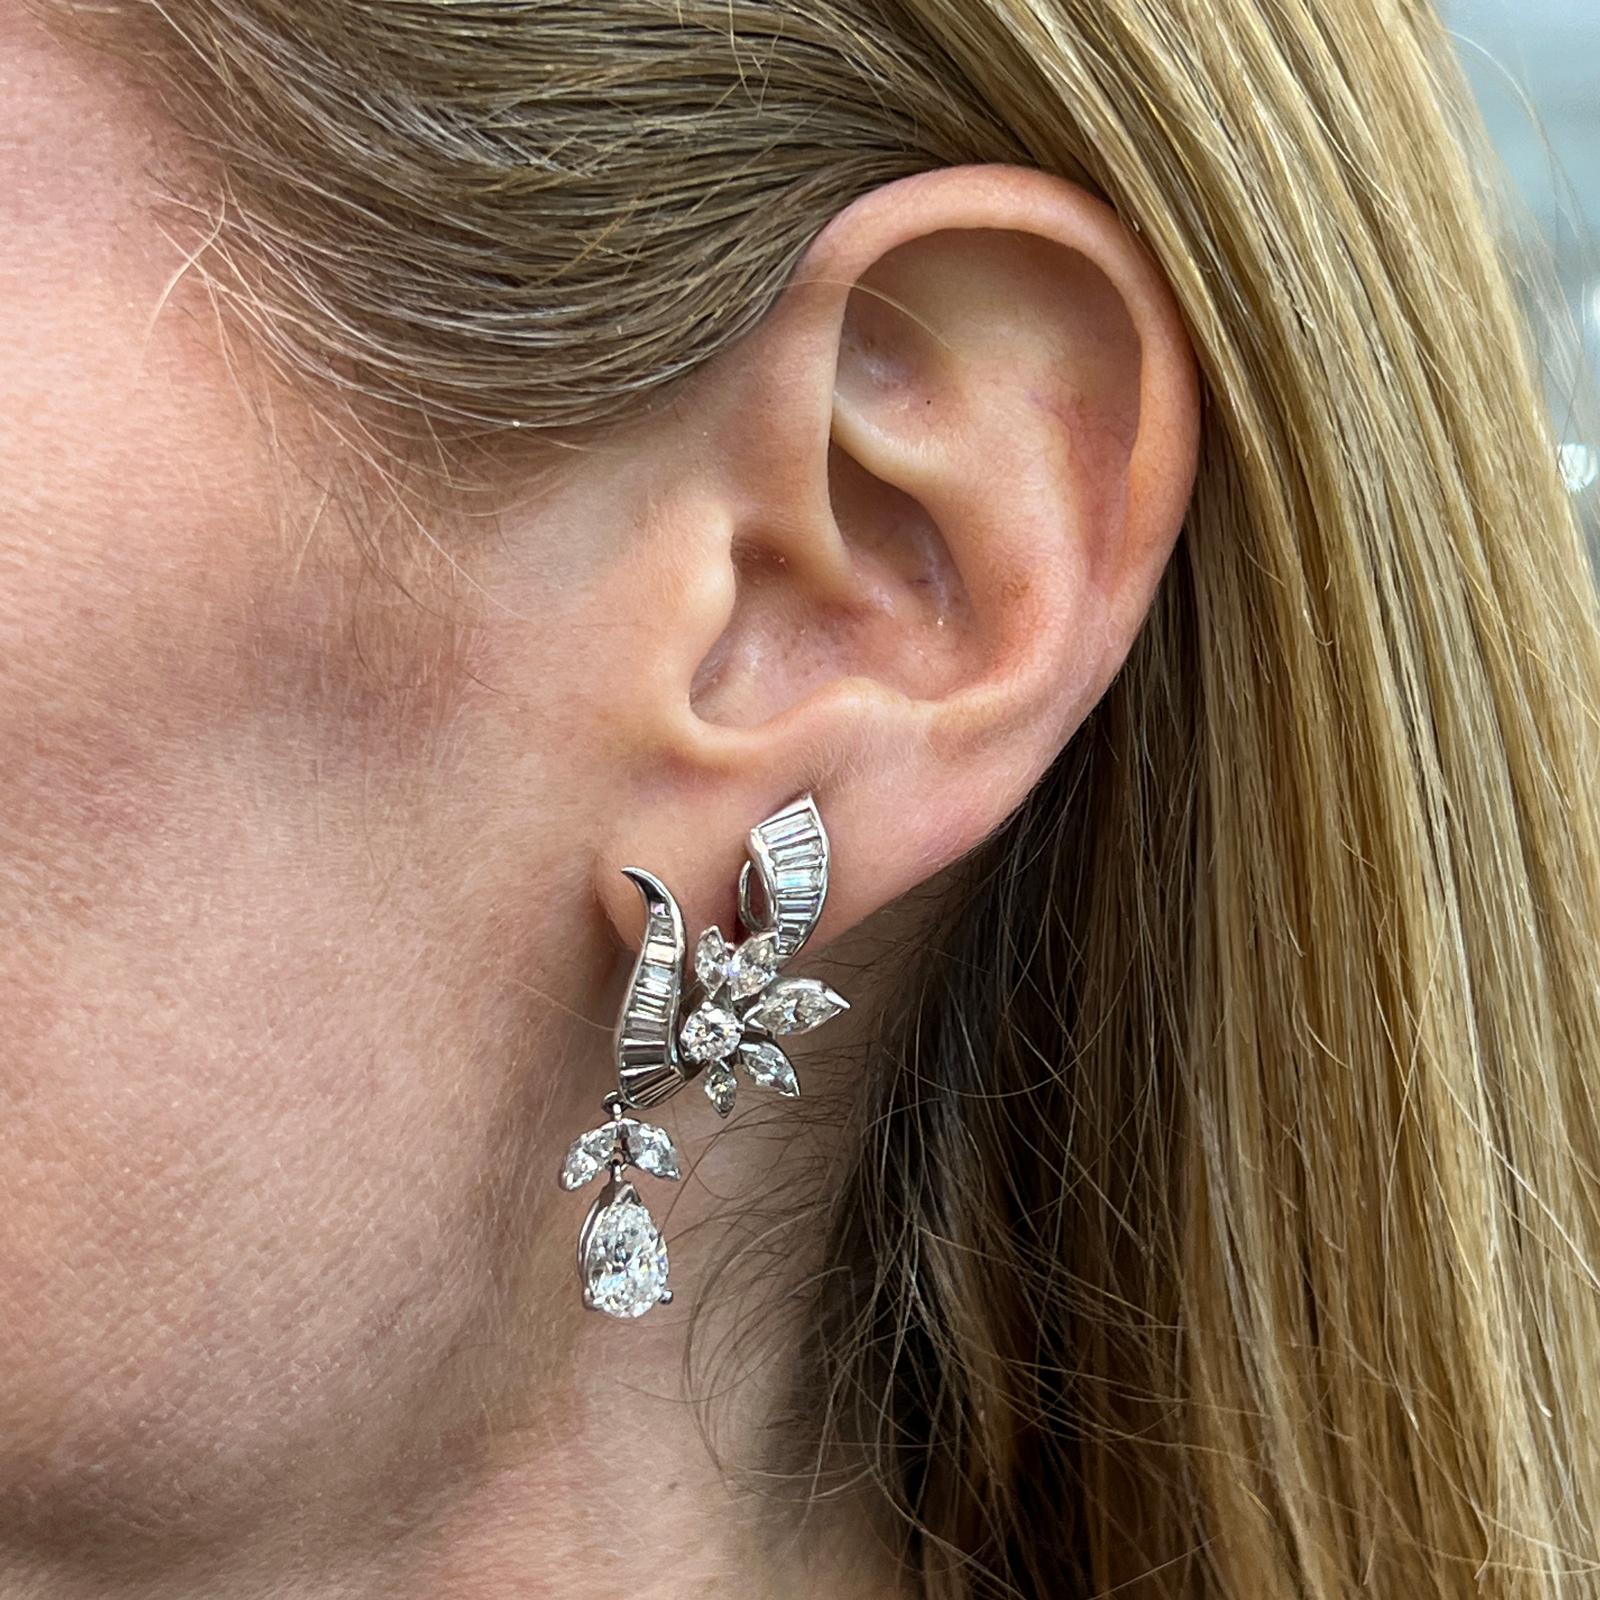 Stunning diamond drop earrings handcrafted in platinum. These Estate earrings feature 2 pear shape drop diamonds weighing 2.23 carat total weight. The round brilliant, baguette, and marquise shape diamonds weigh another 3.90 carats (6.13 CTW). The